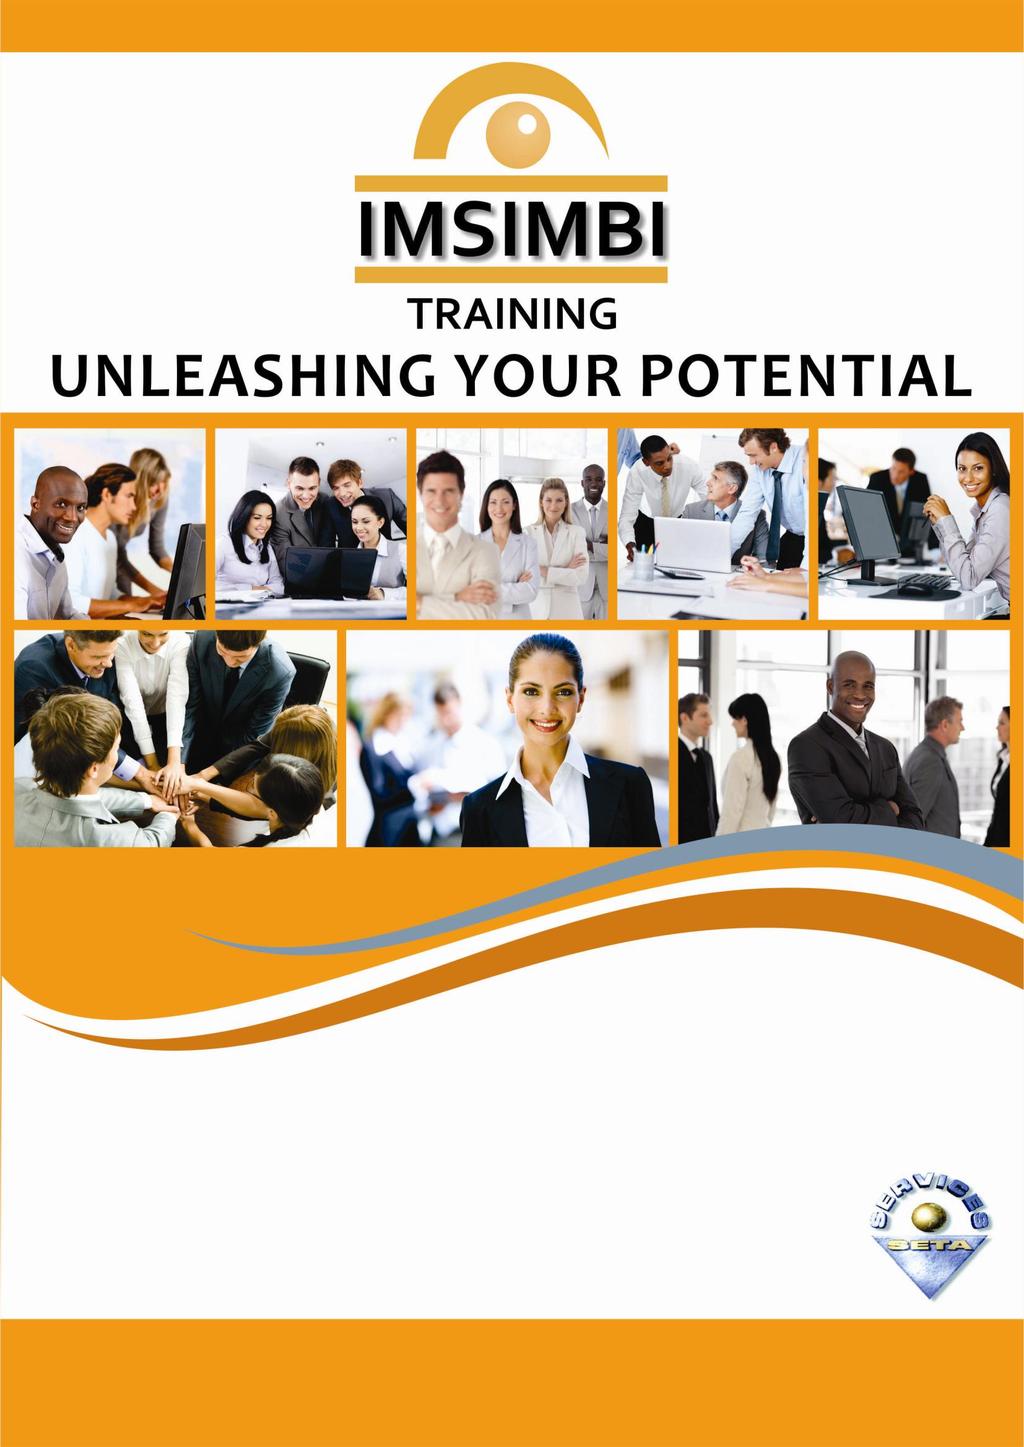 Imsimbi Training proudly presents Professional Conflict & Change Management 5 DAYS Imsimbi Training is a fully accredited training provider with the Services Seta, number 2147, as well as a Level 2